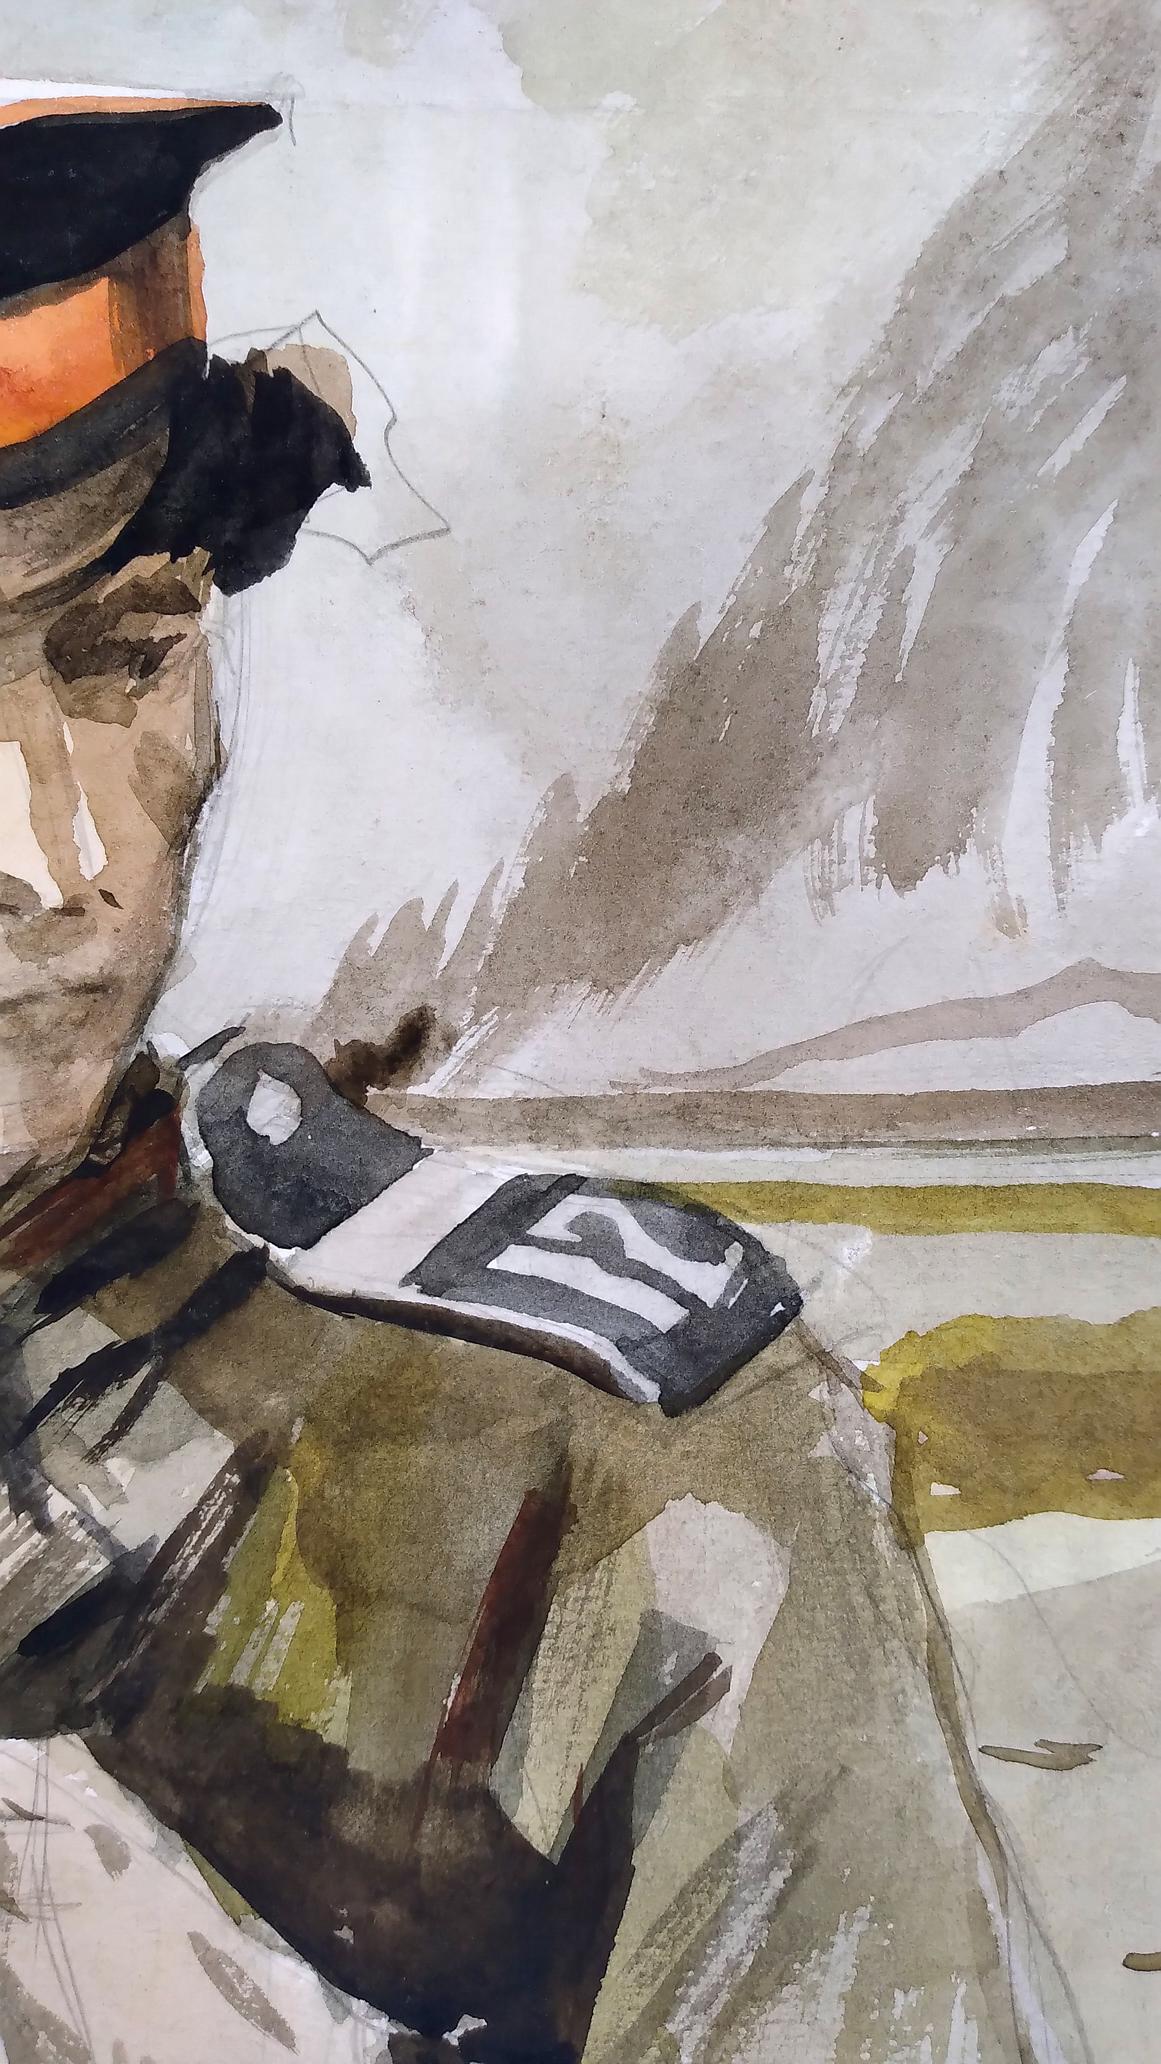 Social realism watercolor painting Soldier on the road Unknown author